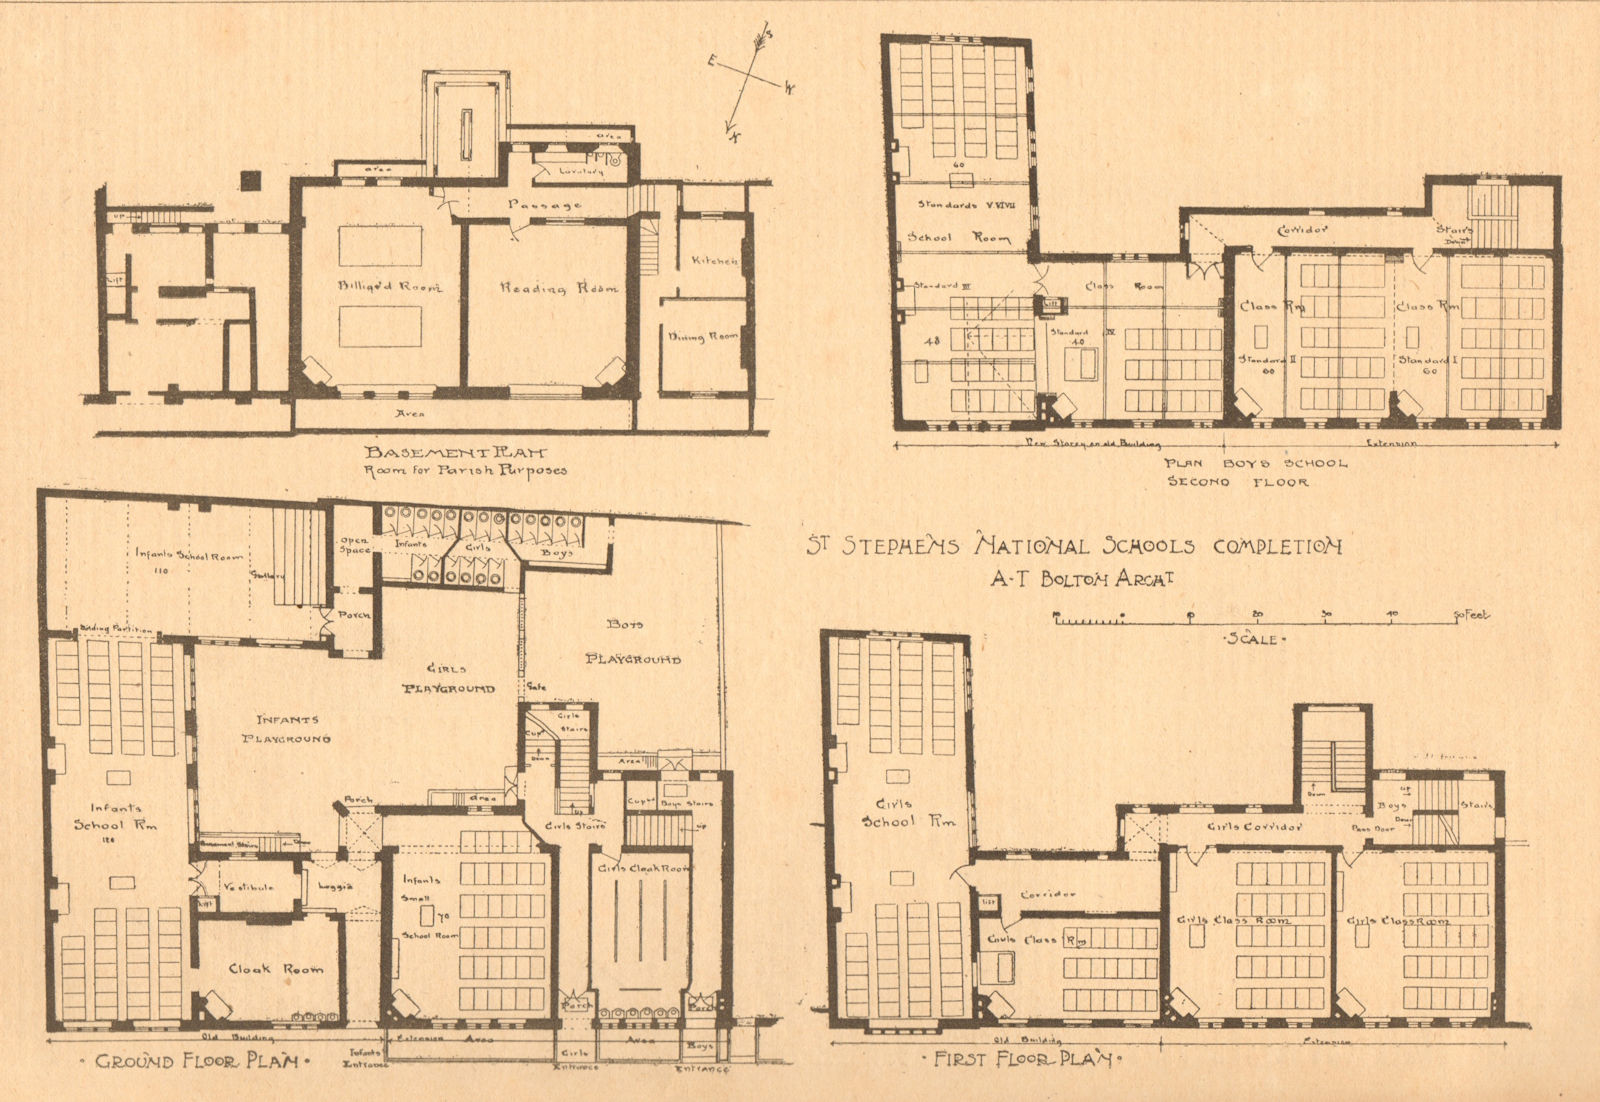 St Stephens national schools completion, A.T. Bolton Archt. Basement, plan 1900